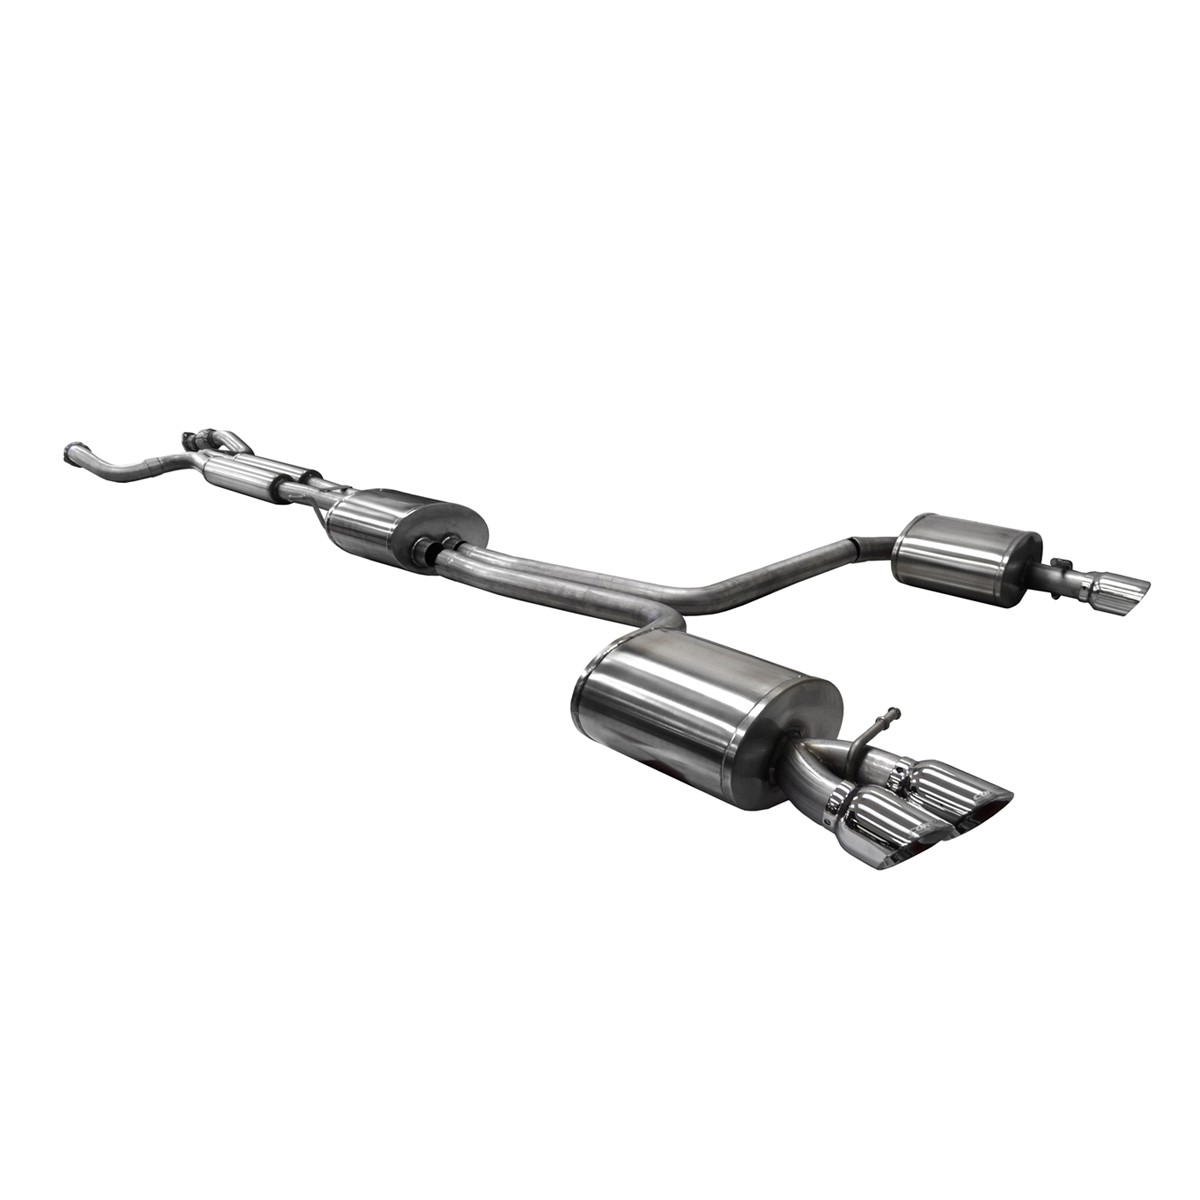 Corsa Performance B8 Audi S4/S5 3.0T Cat-Back Exhaust System